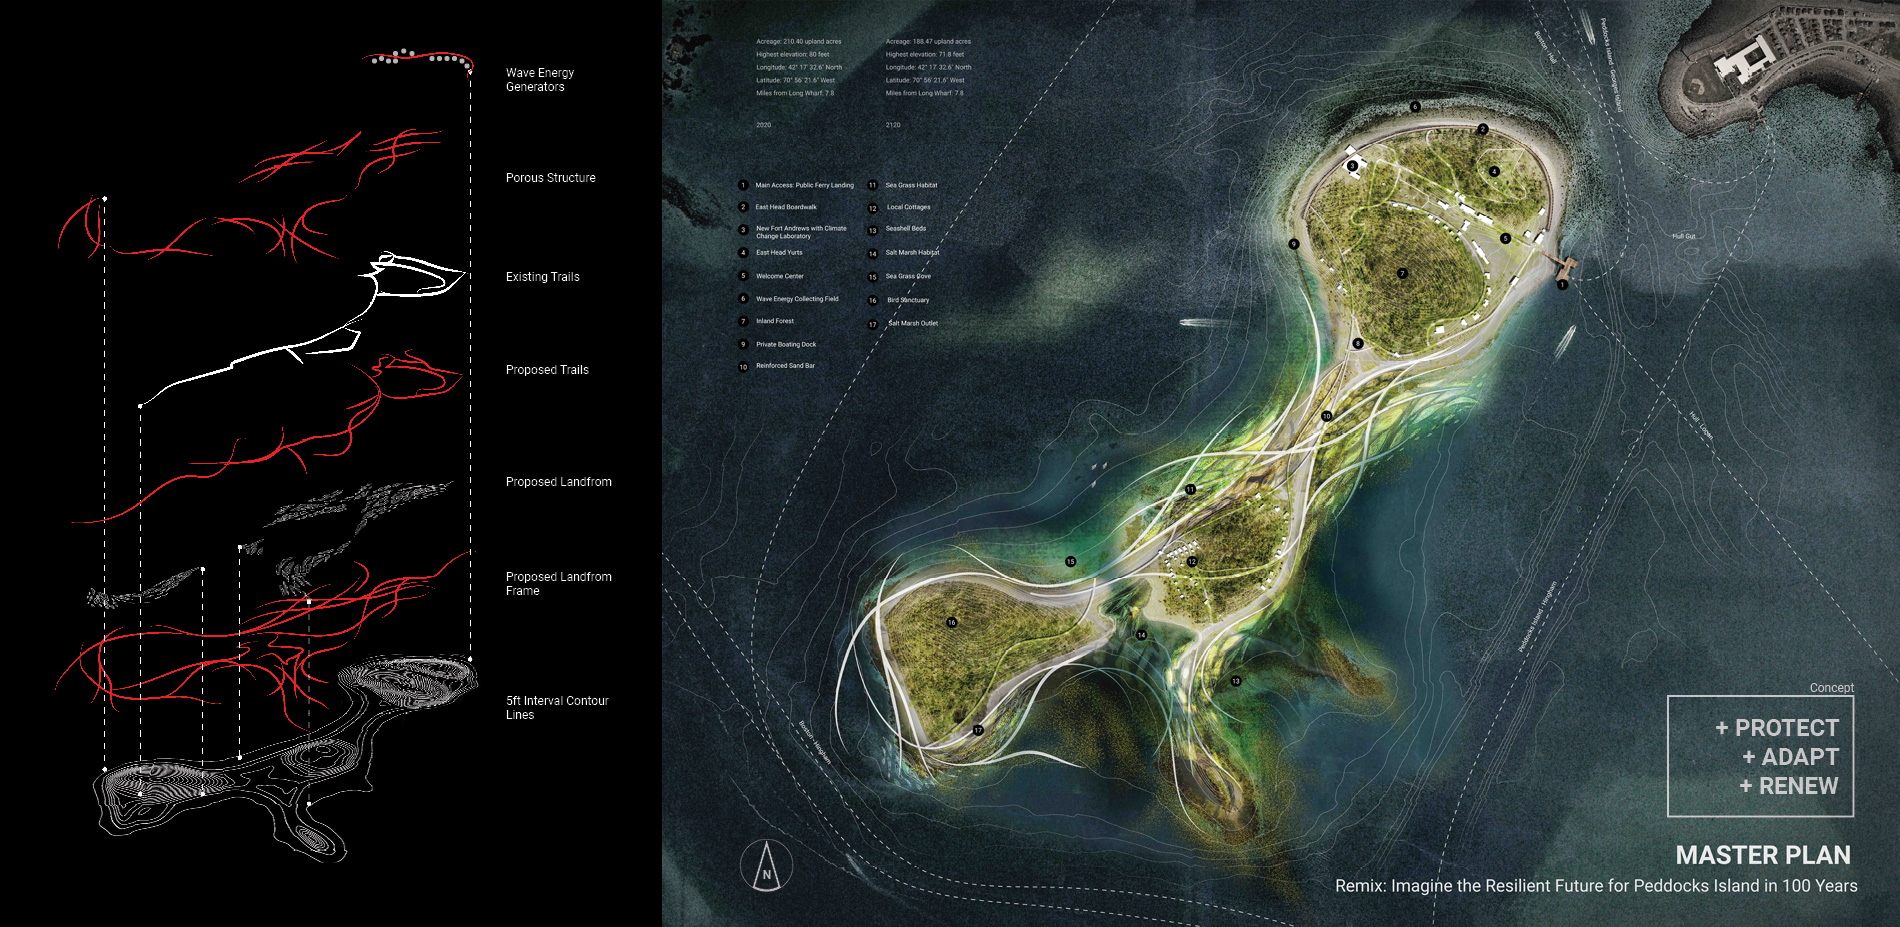 MASTER PLAN: Imagine the future for Peddocks Island in a 100 years